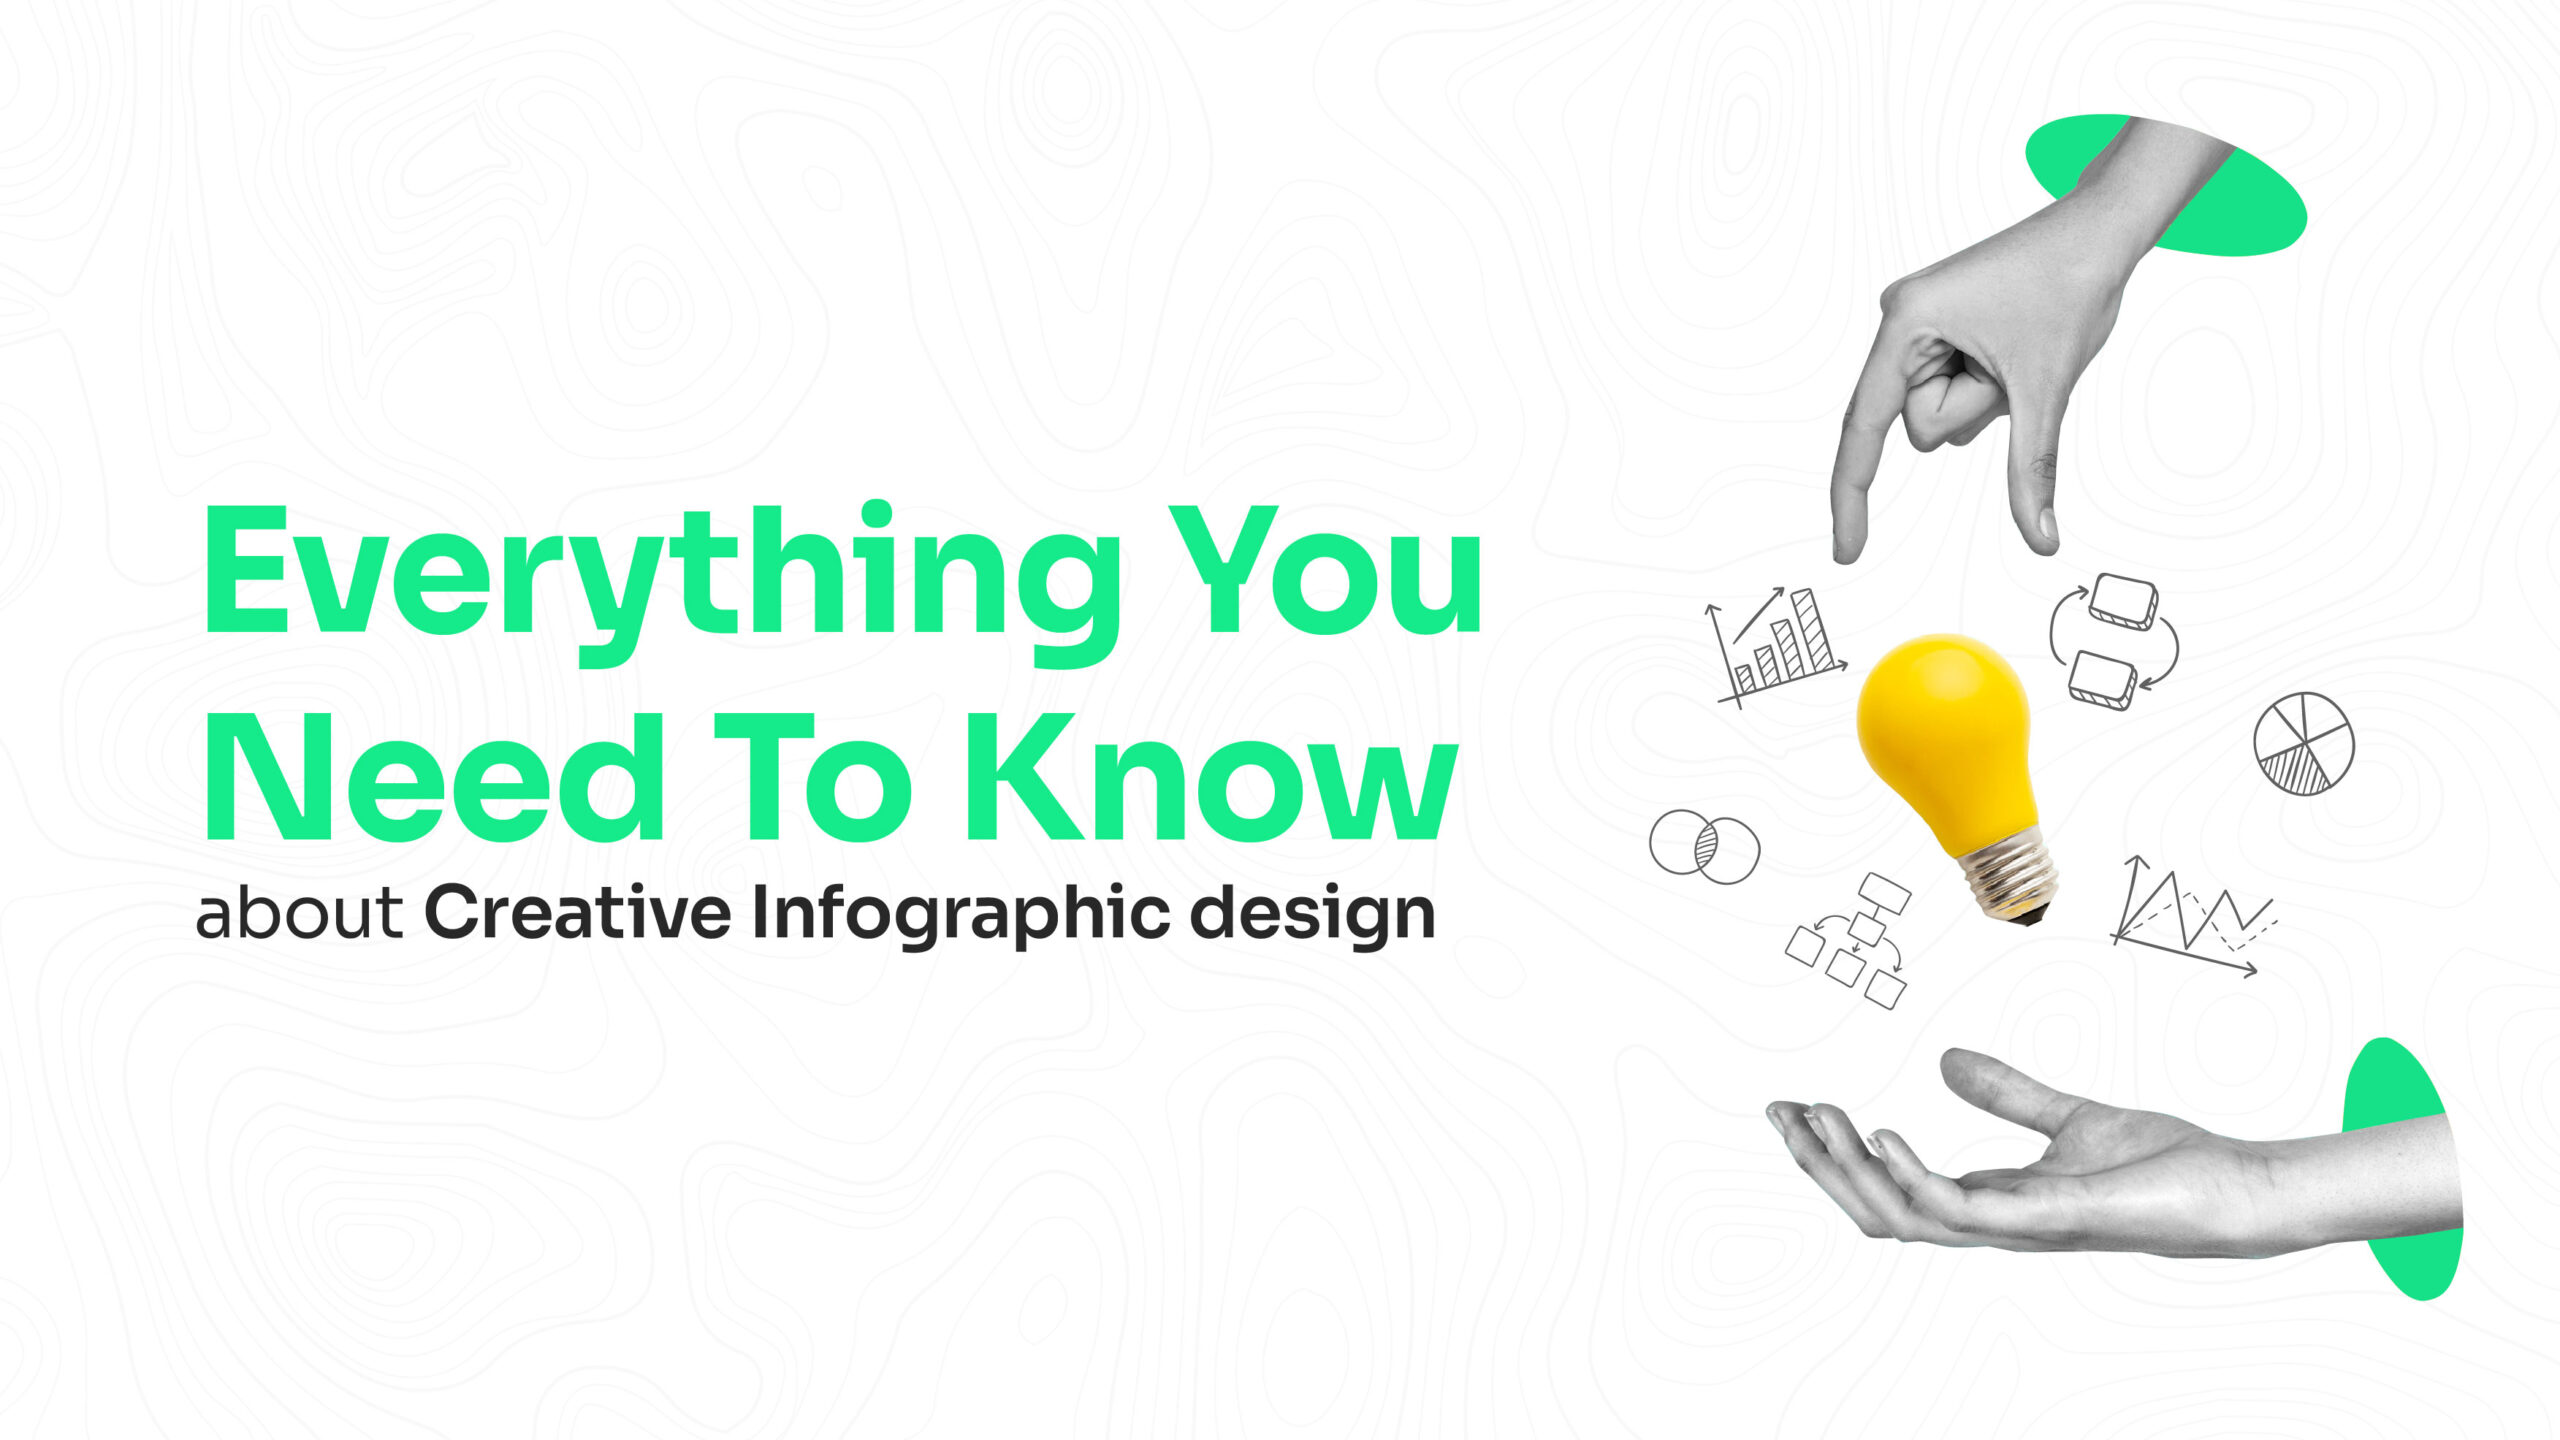 Everything you need to know about creative infographic design | professional graphic design | infographic design services | creative designing | creative infographic design